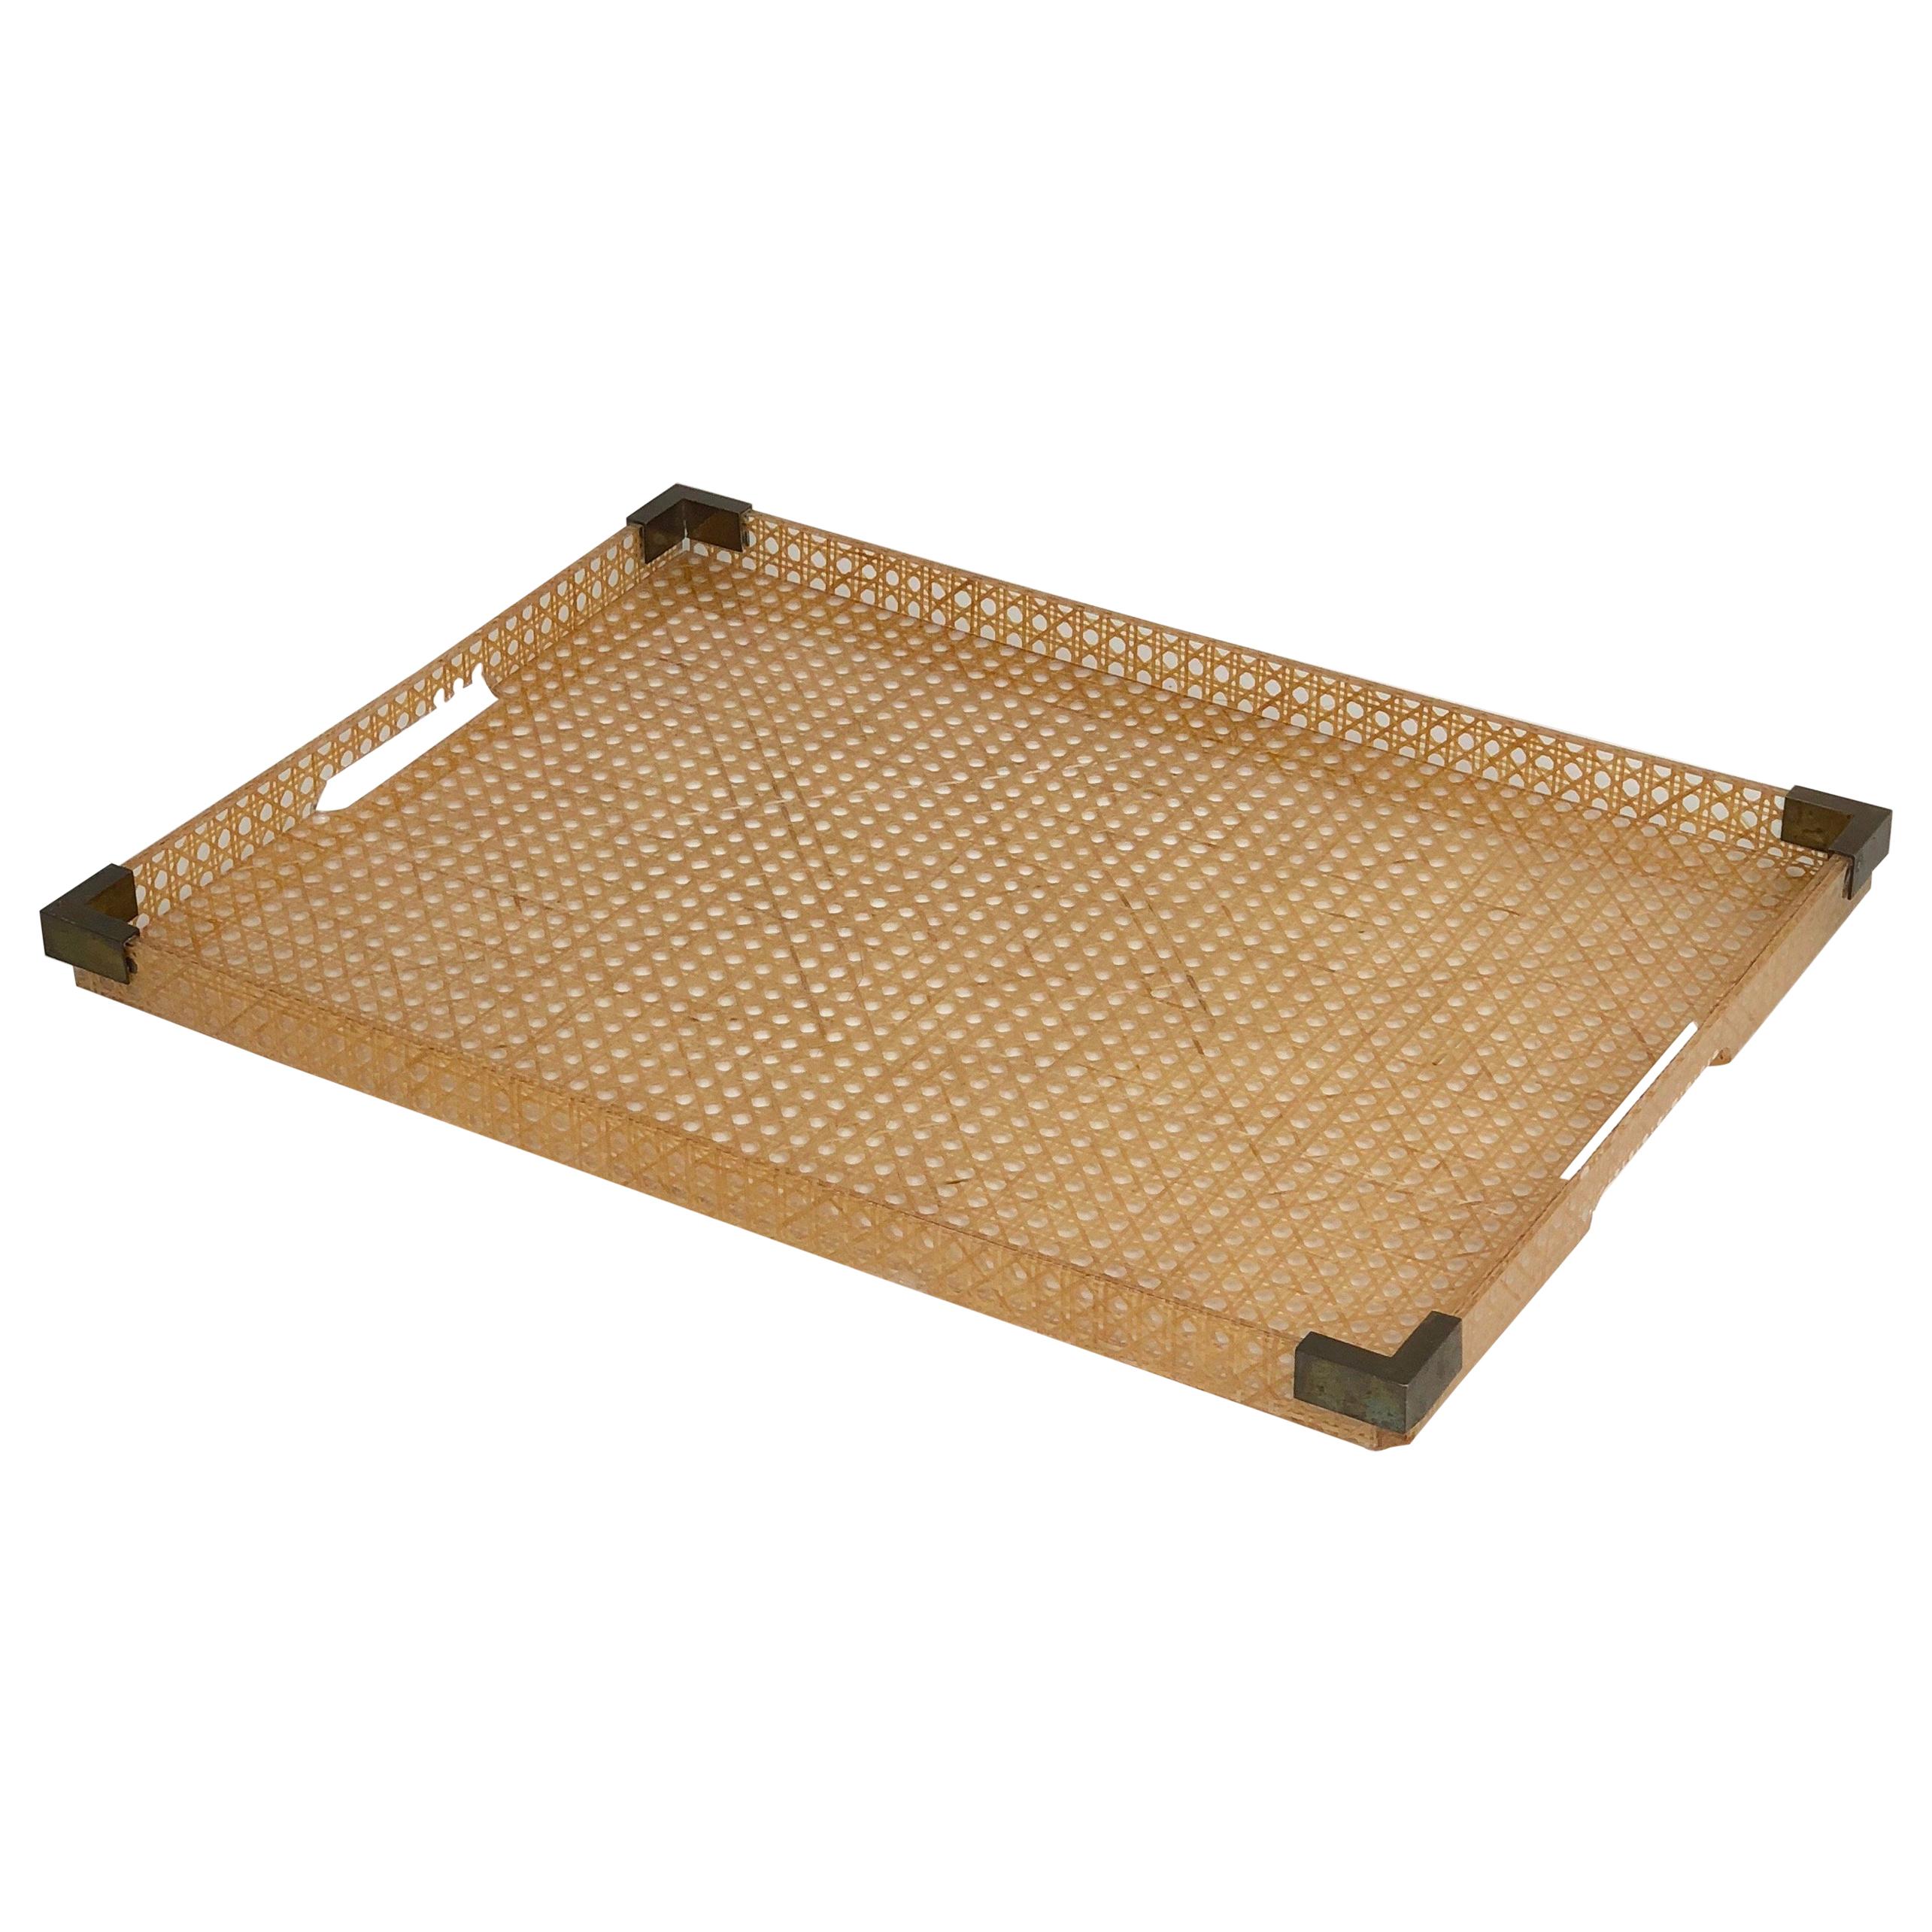 1970s Lucite, Brass and Rattan Serving Tray by Christian Dior Home Collection